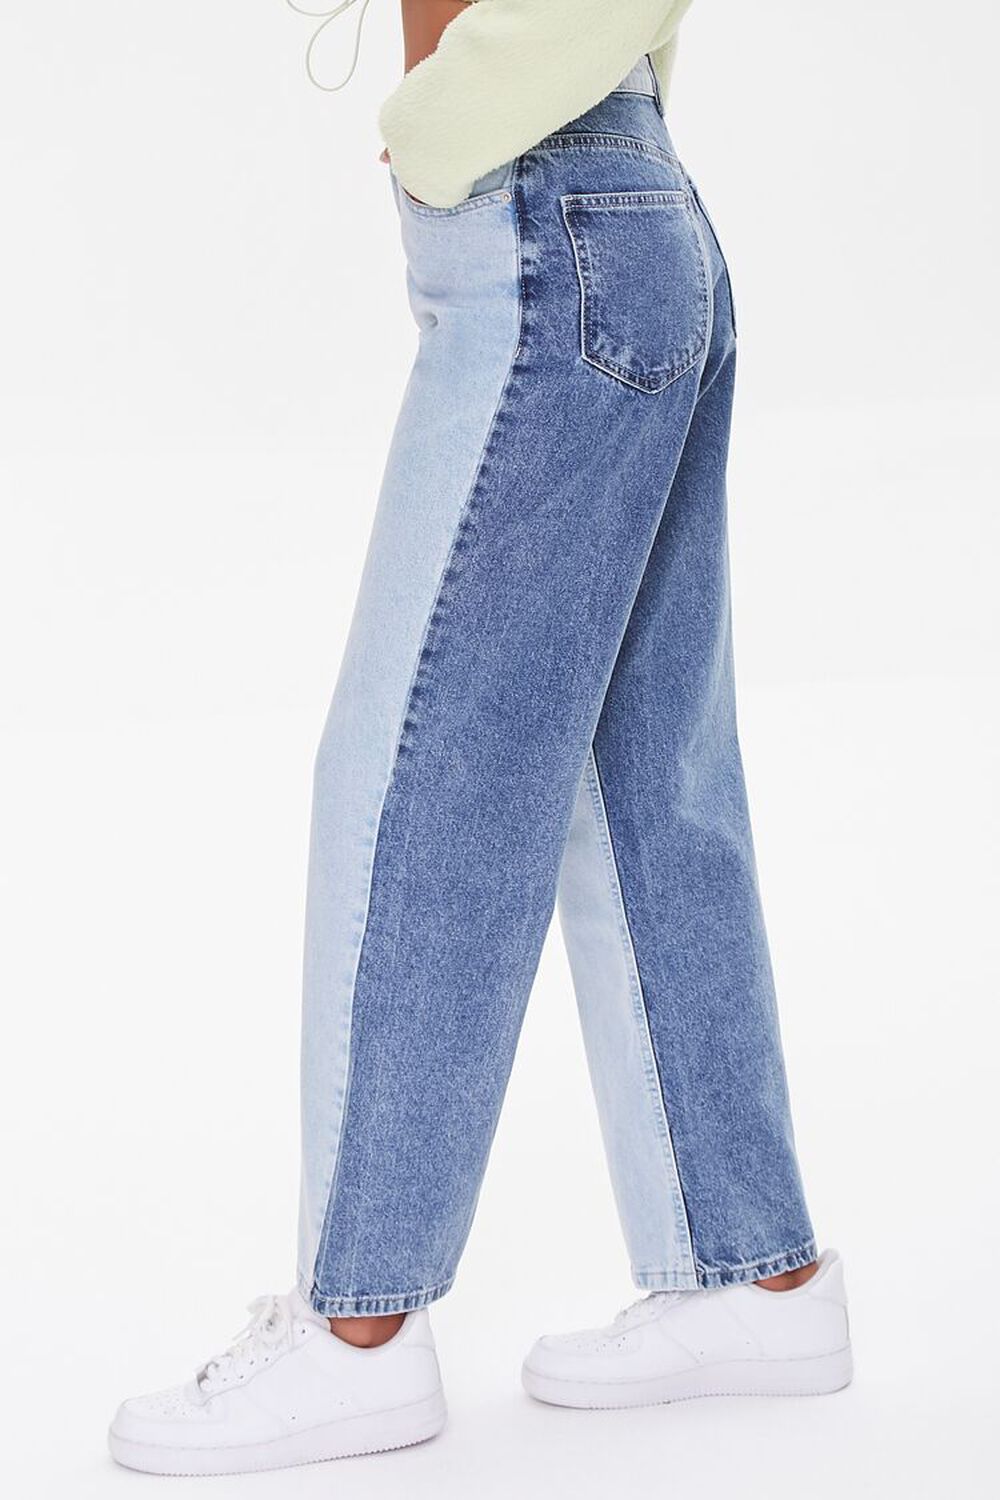 90s-Fit High-Rise Jeans